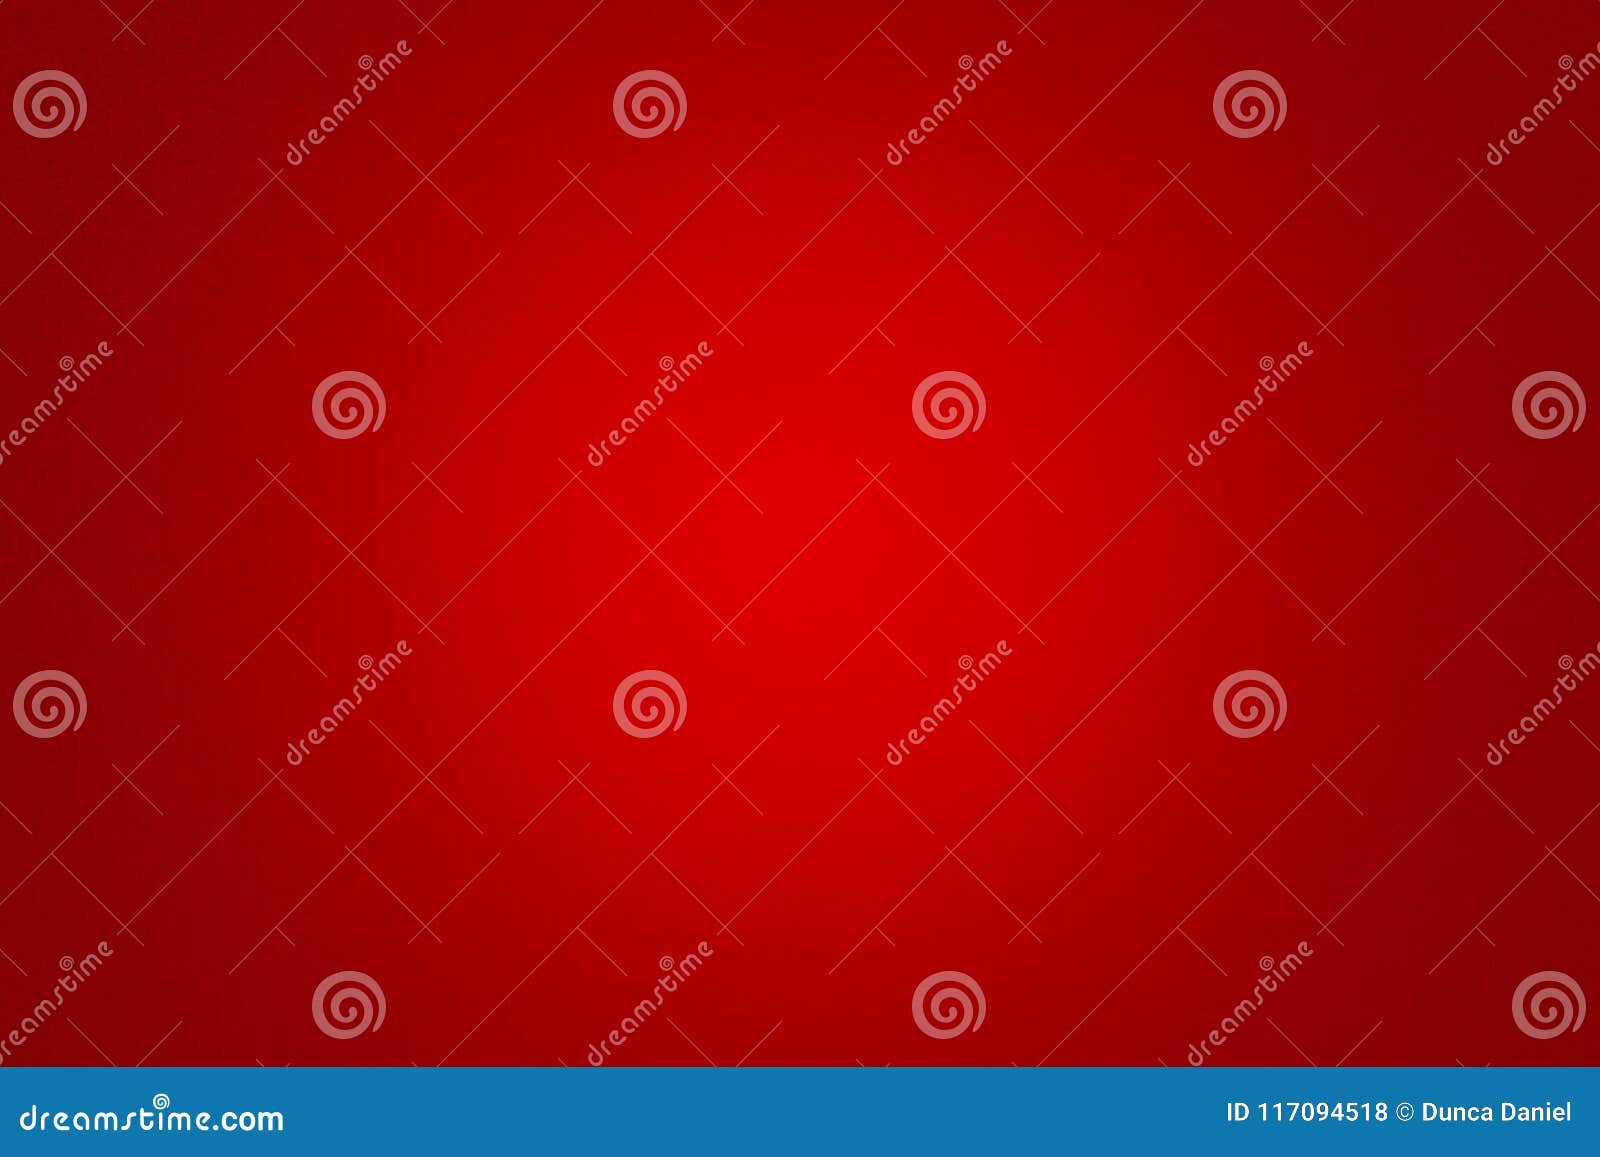 Clean Simple Blood Red Color Background Stock Illustration - Illustration  of radial, surface: 117094518